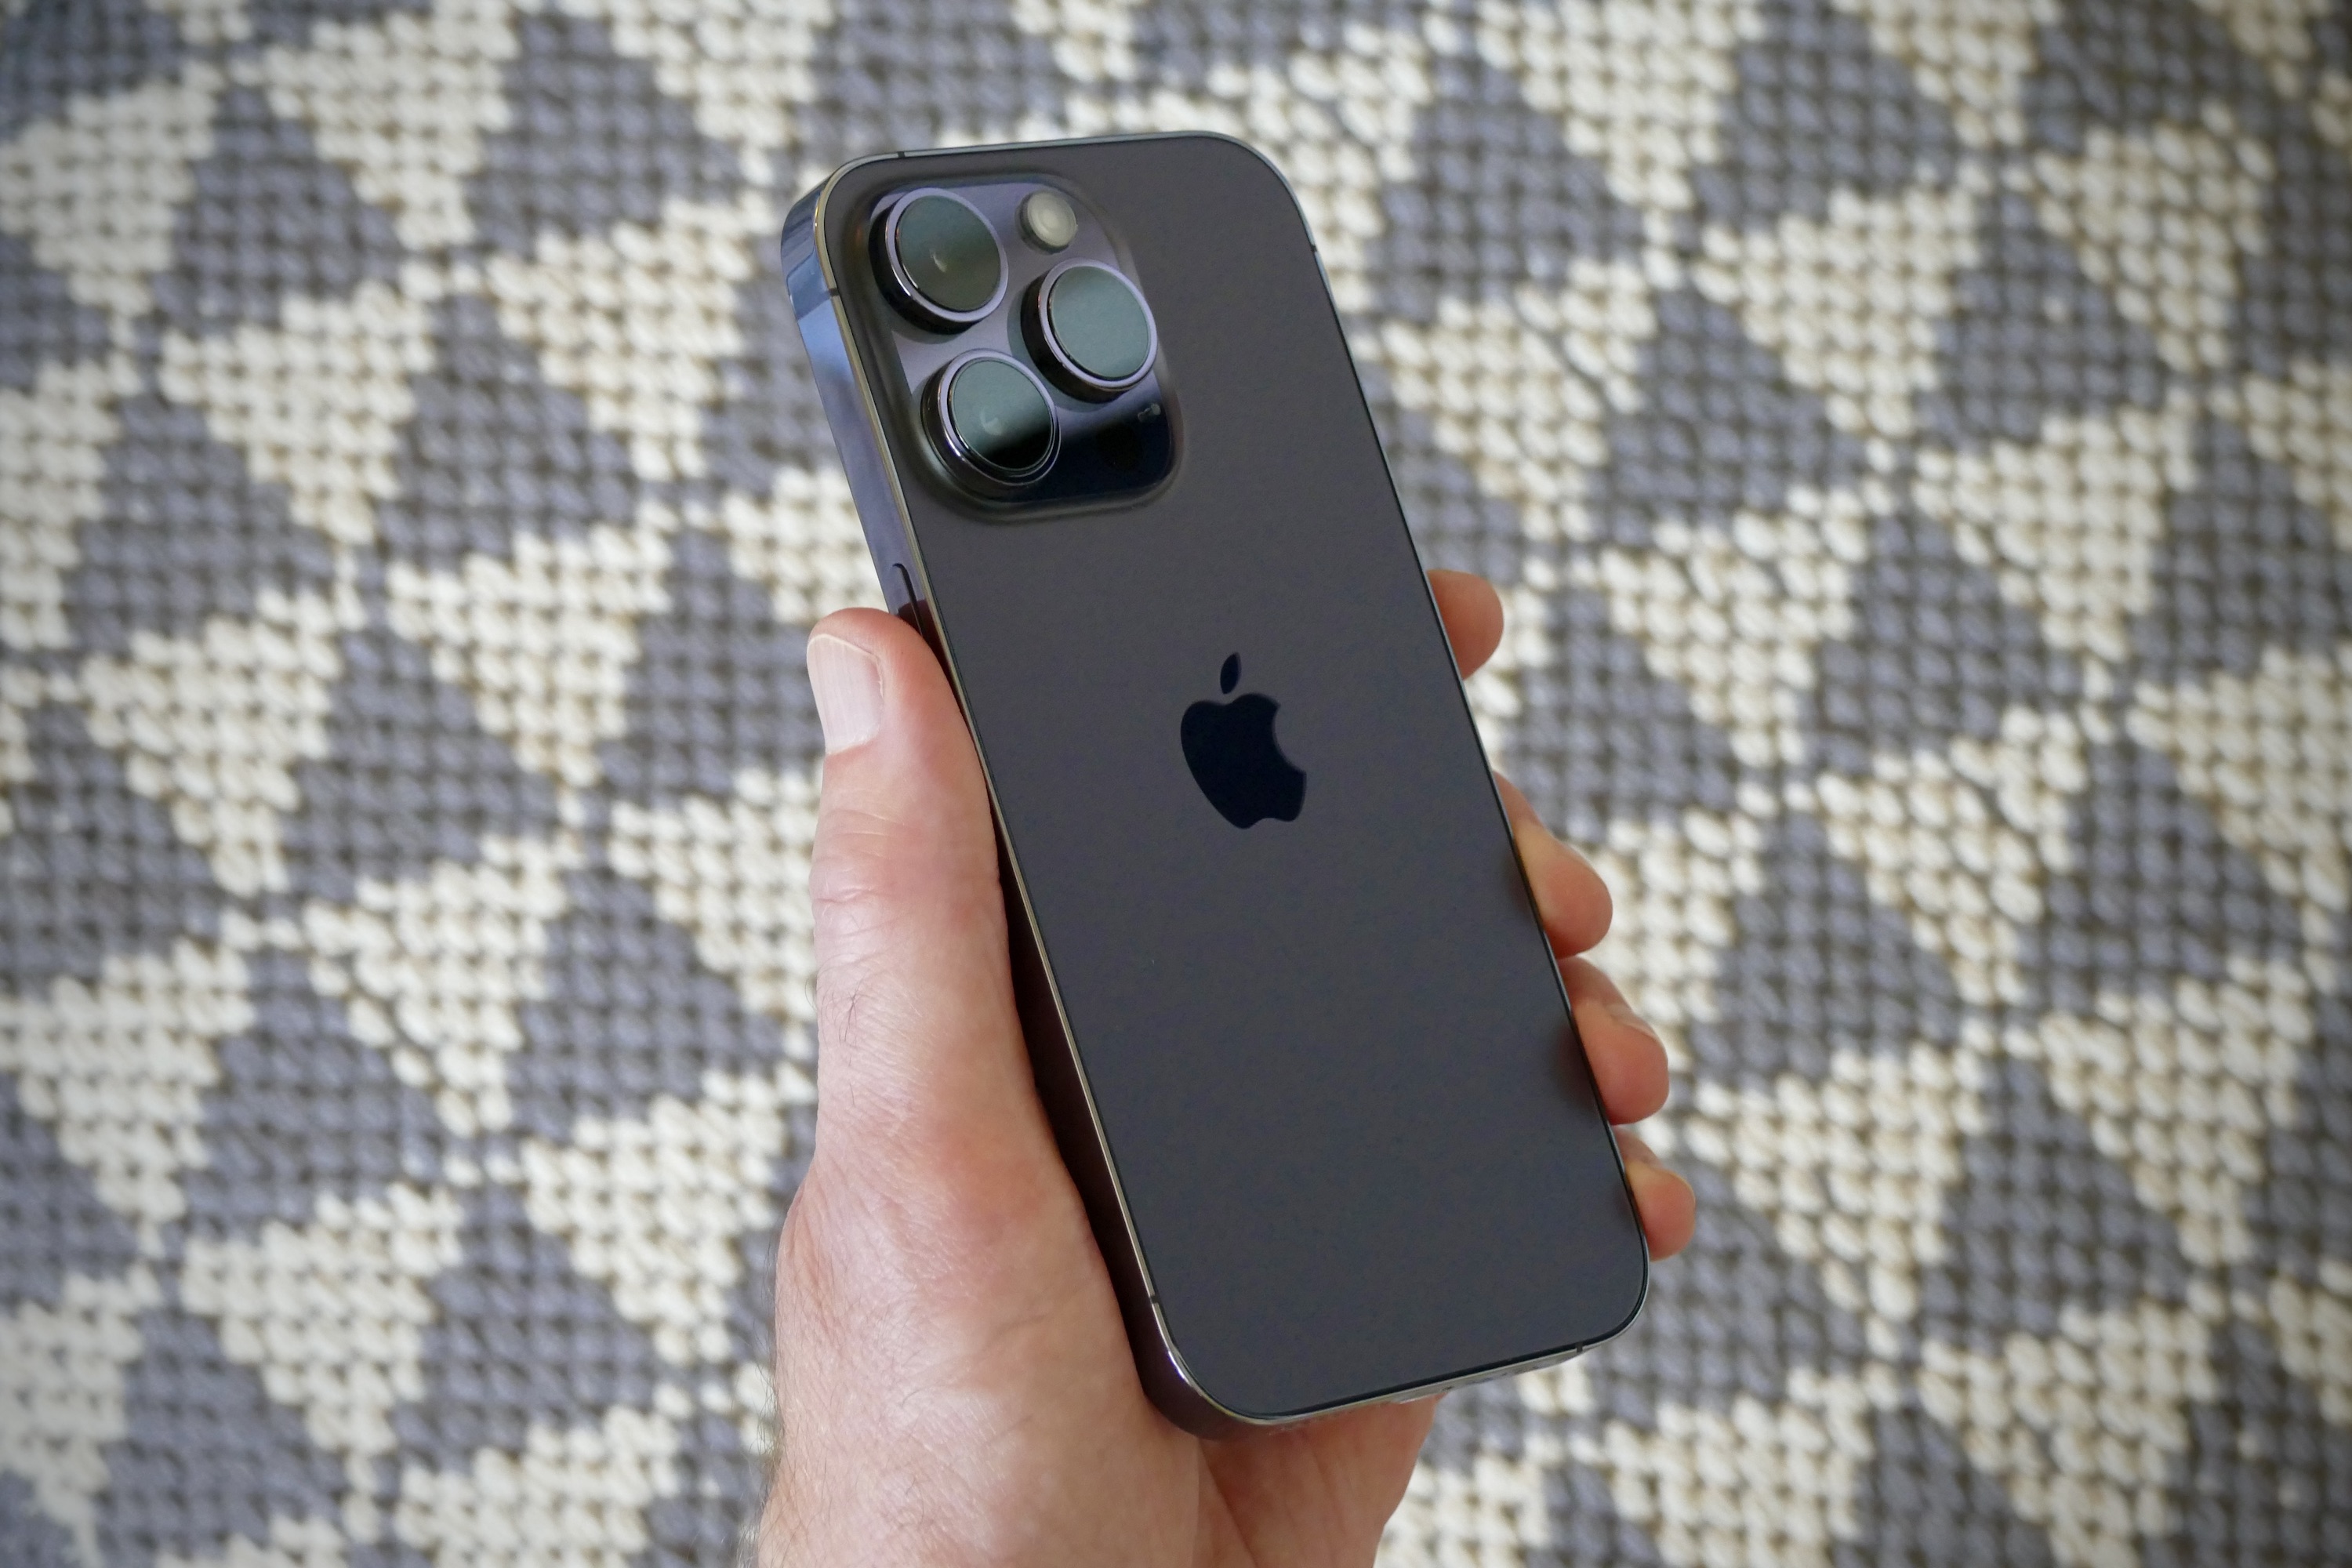 Apple iPhone 14 Pro Max Review - Pros and cons, Verdict